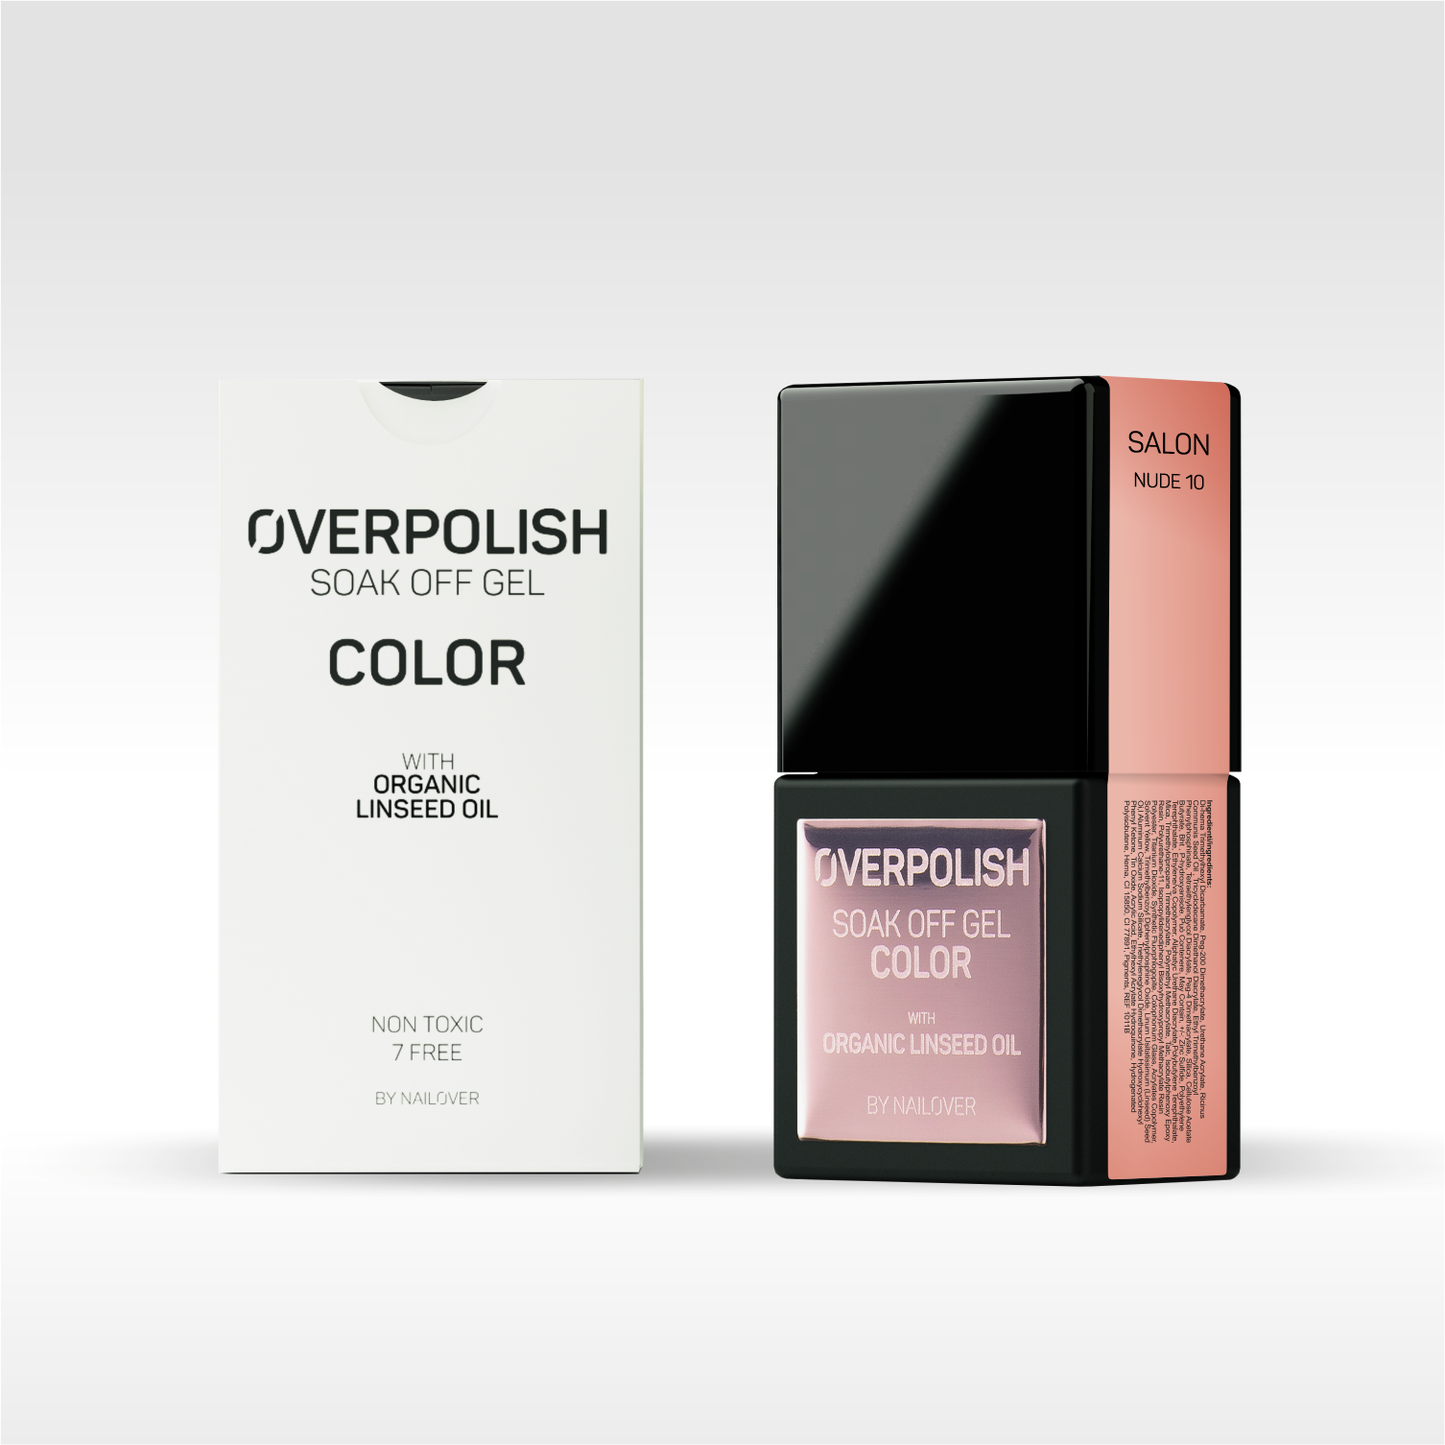 Overpolish Soak Off Gel Color - Nude Tones WITH ORGANIC LINSEED OIL